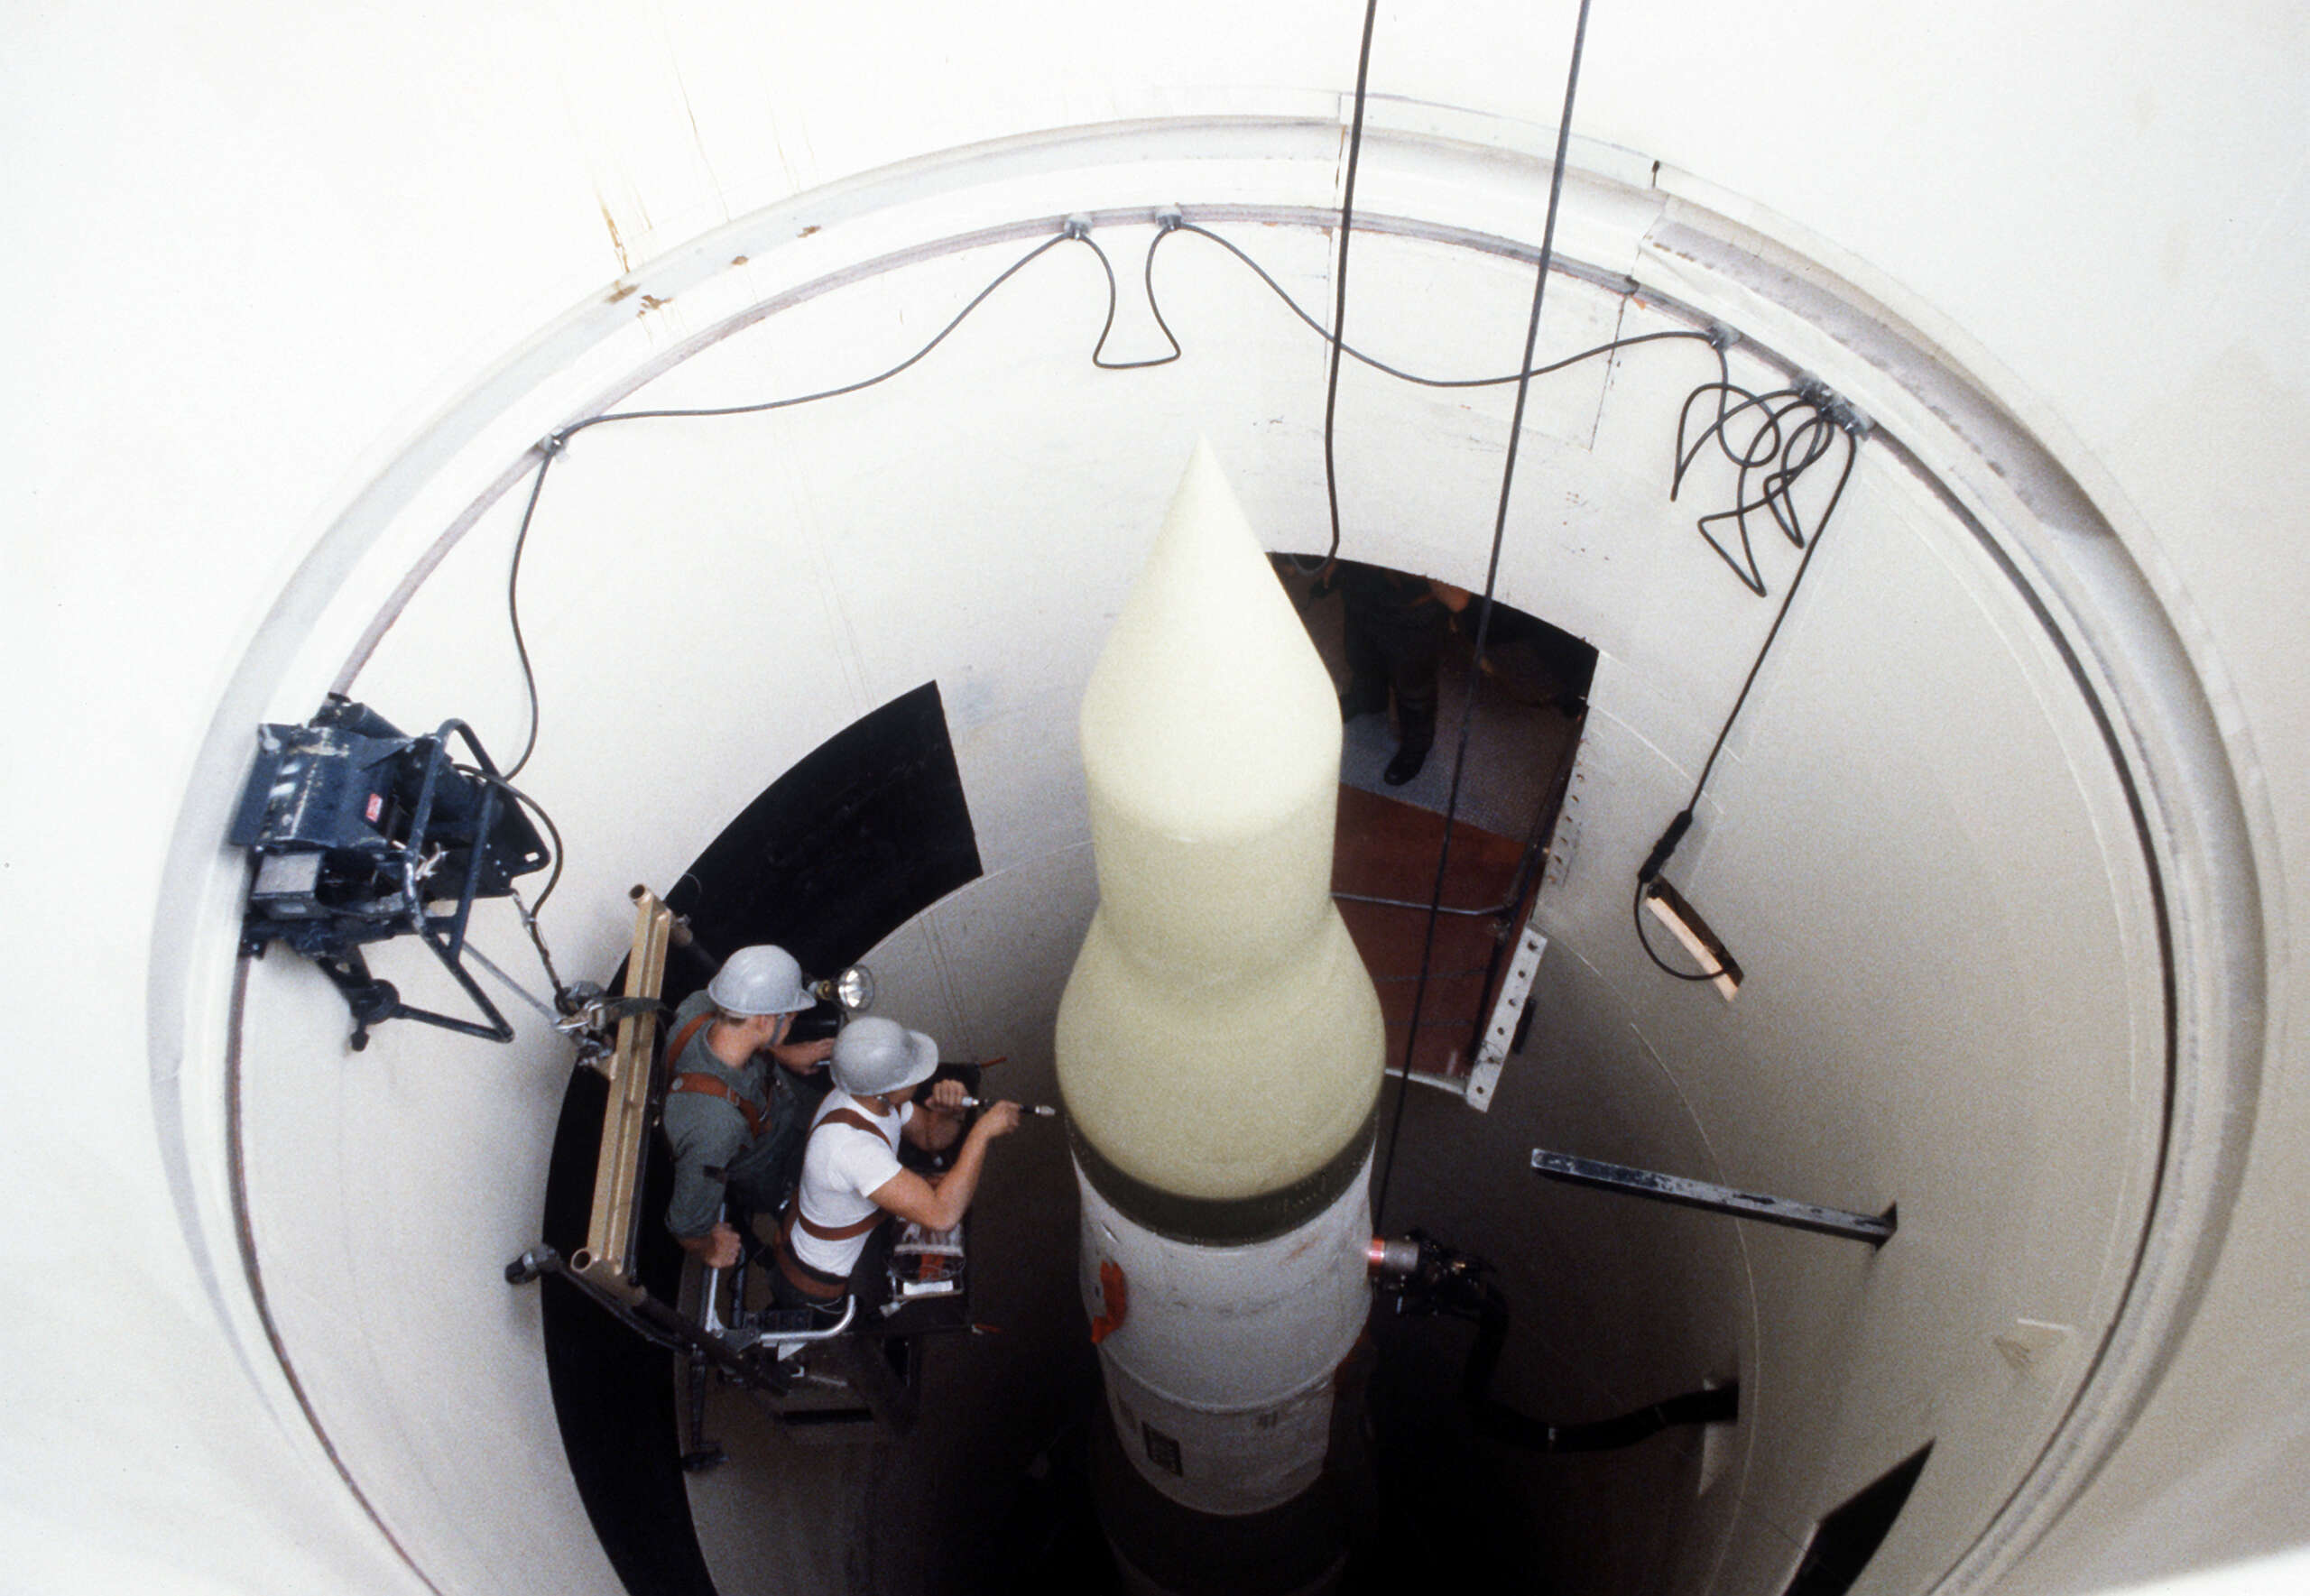 Congress Receives Nuclear Warhead Plan - Federation of American Scientists